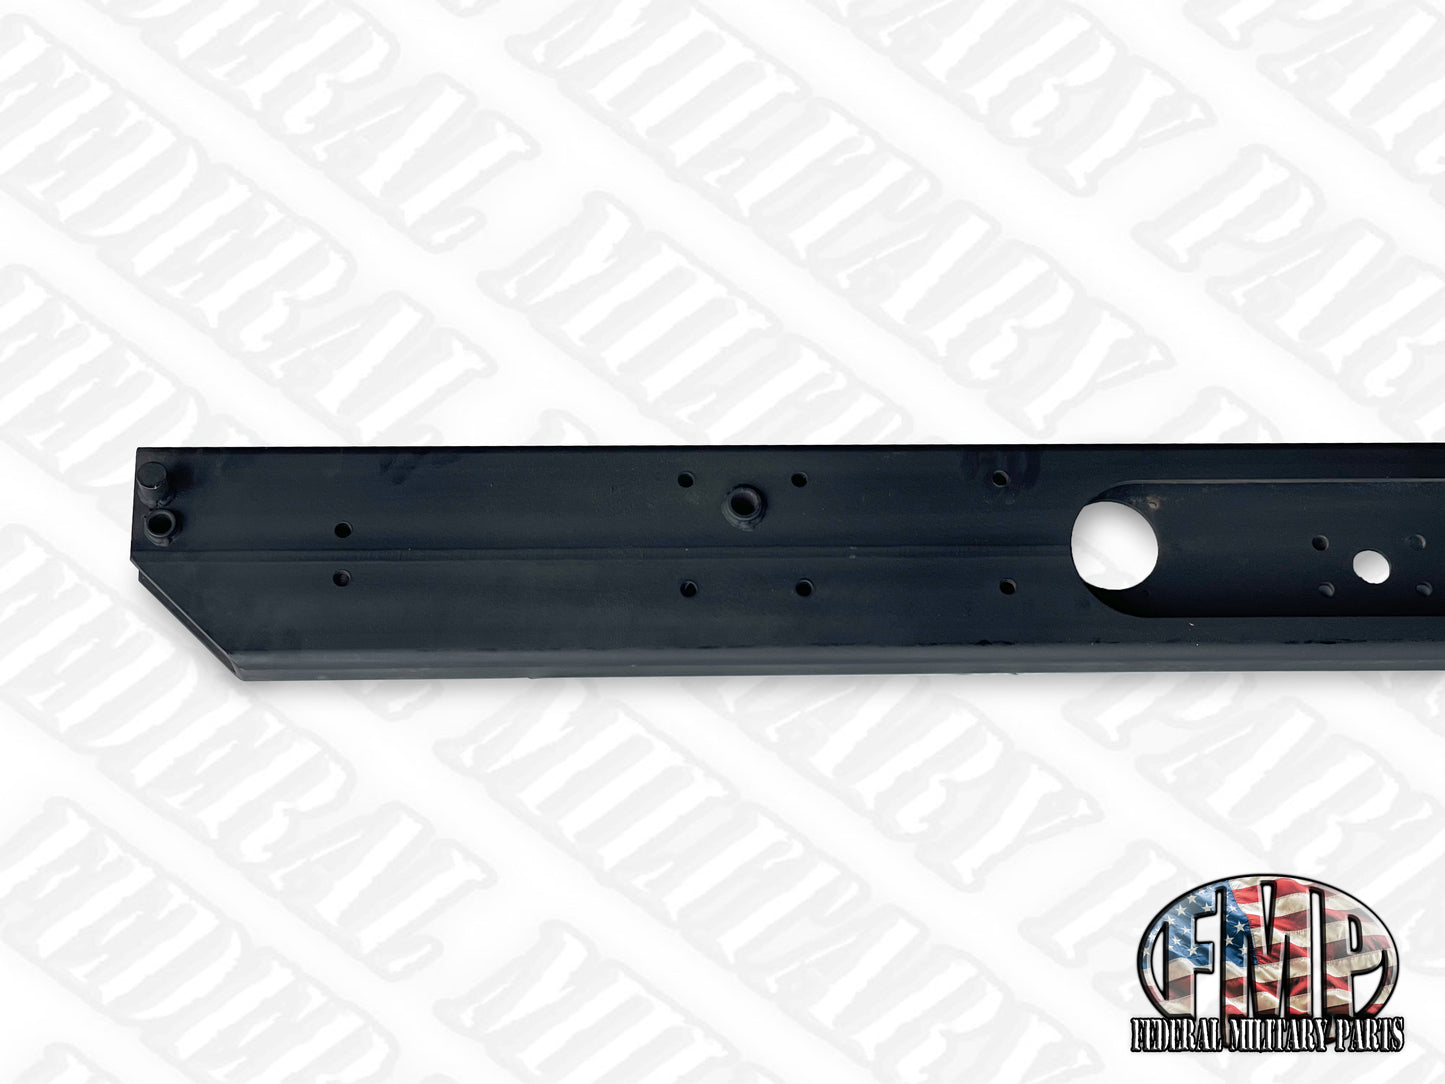 Rear Bumper Only for the HUMVEE / M998 / M1038 / M1097 / M1043A2 / M1045A2